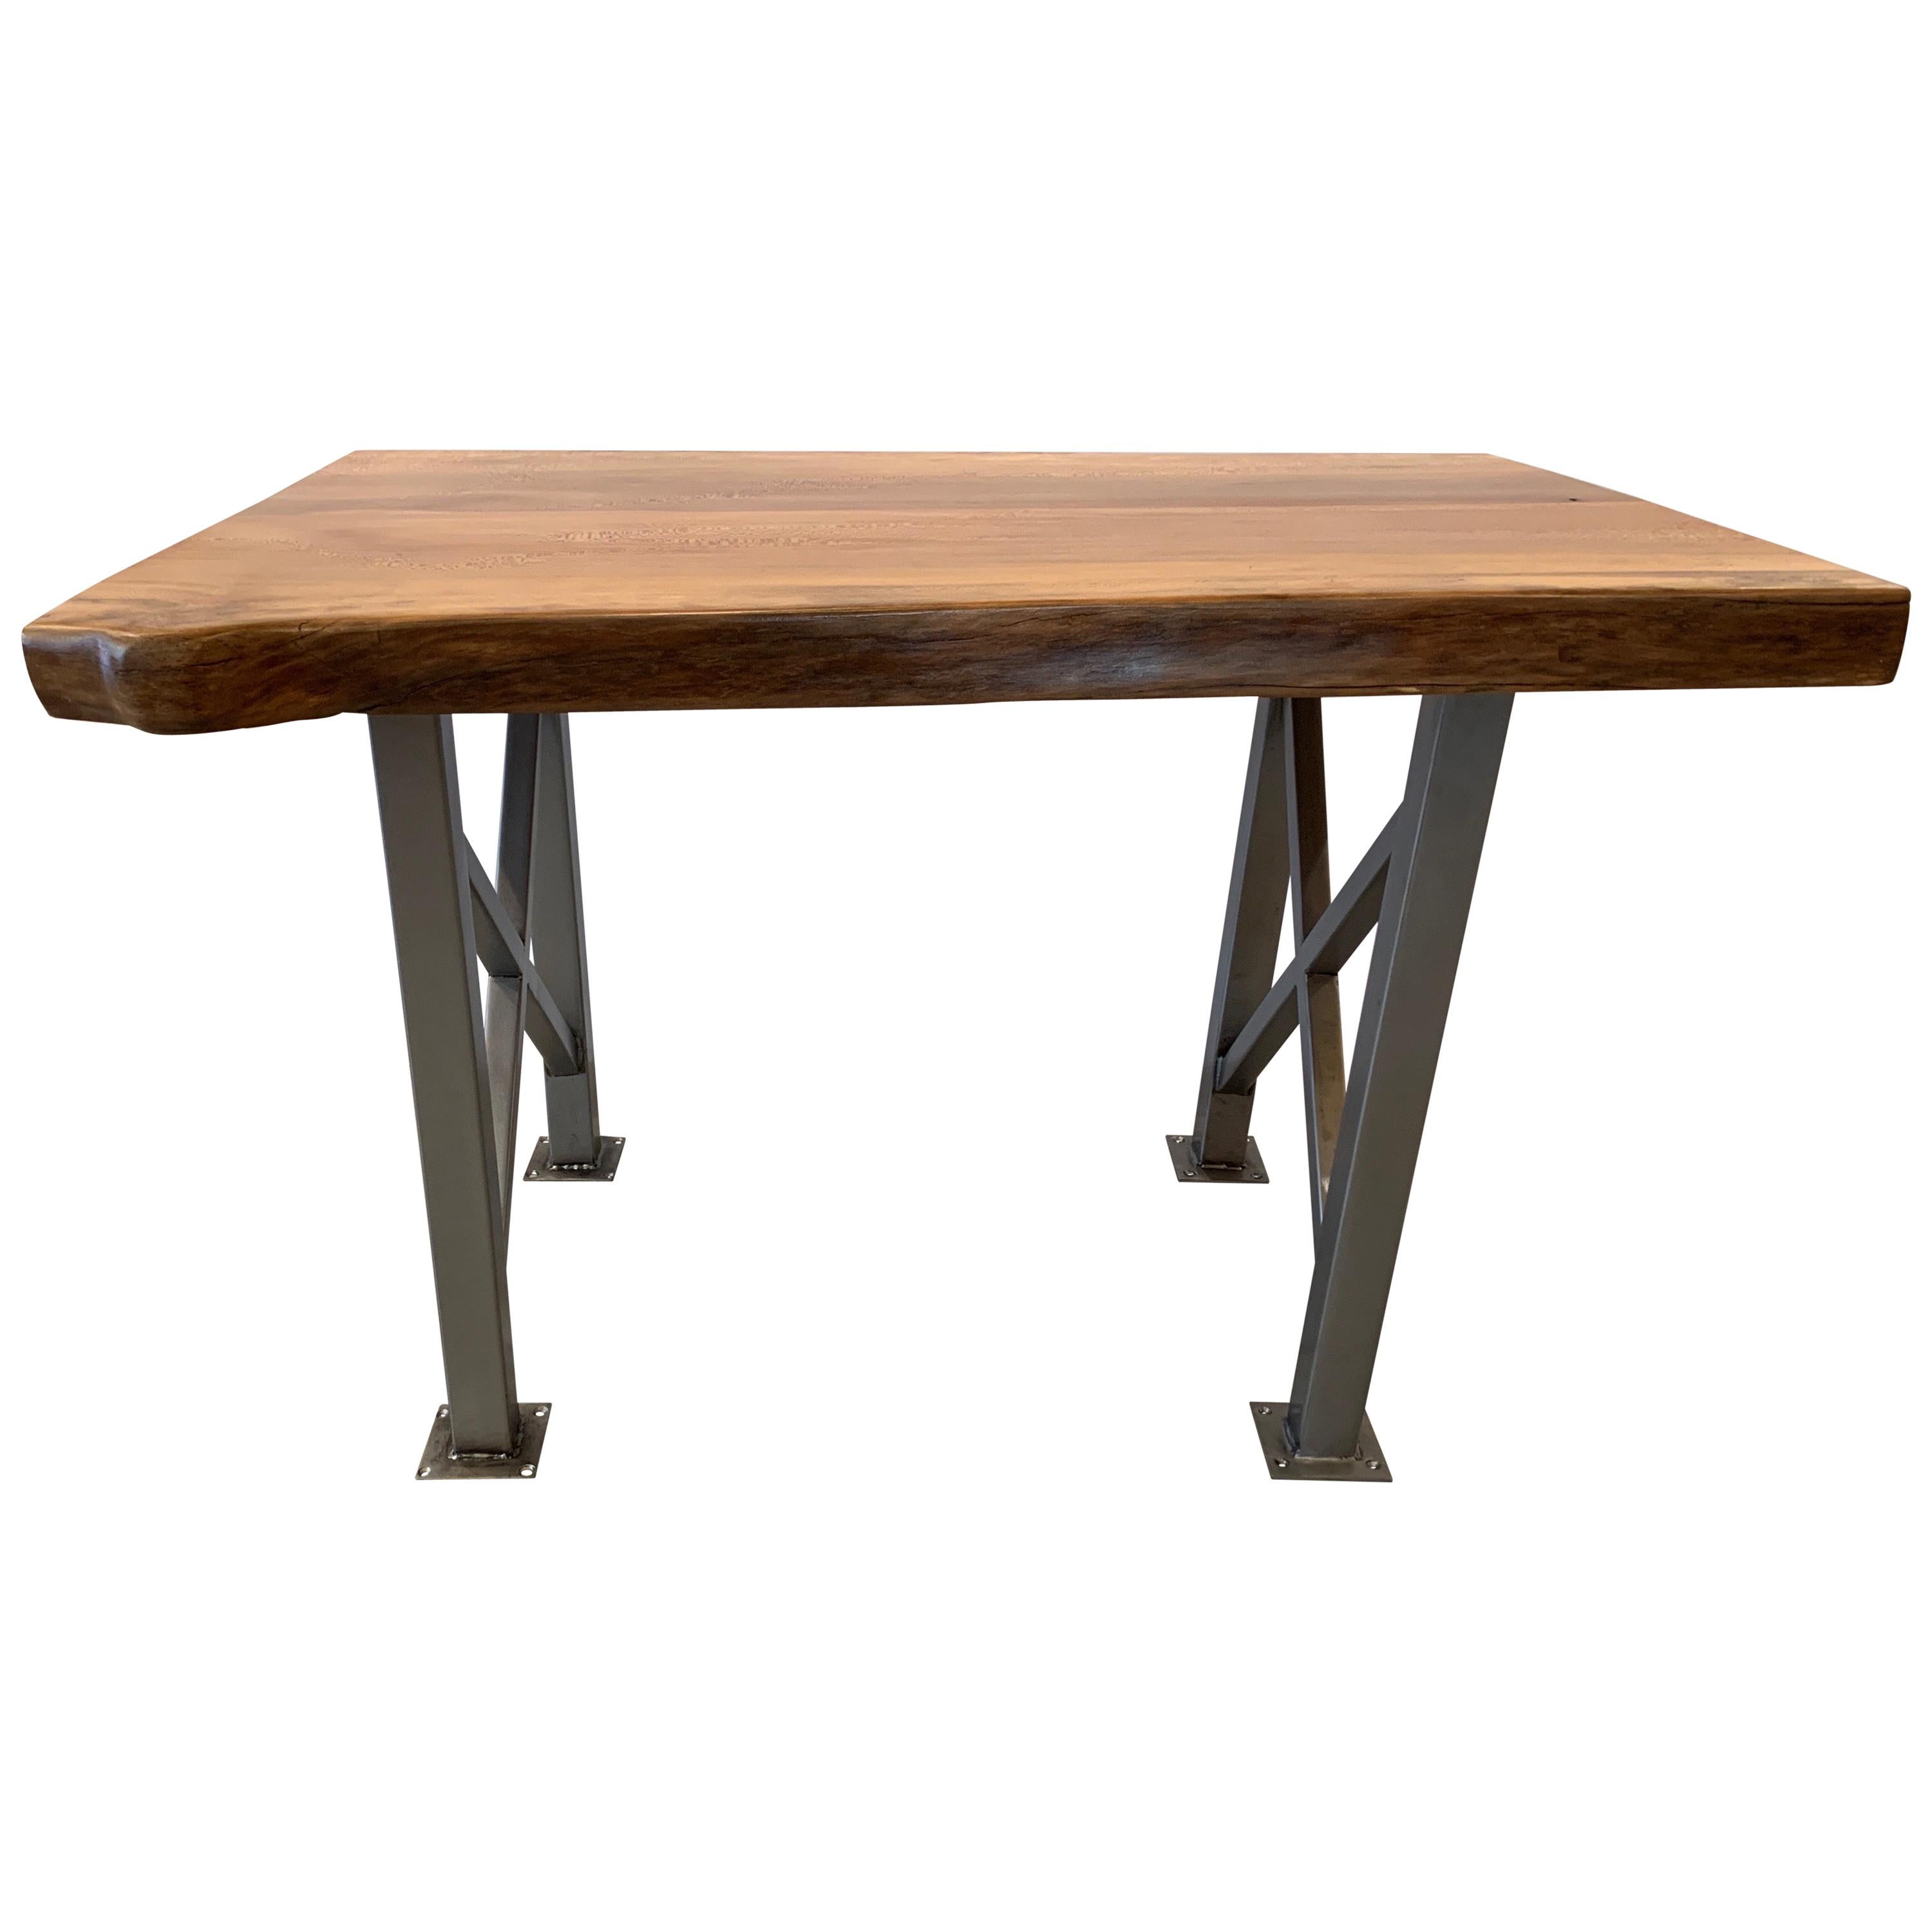 Maple Freeform Table with Industrial Steel Base